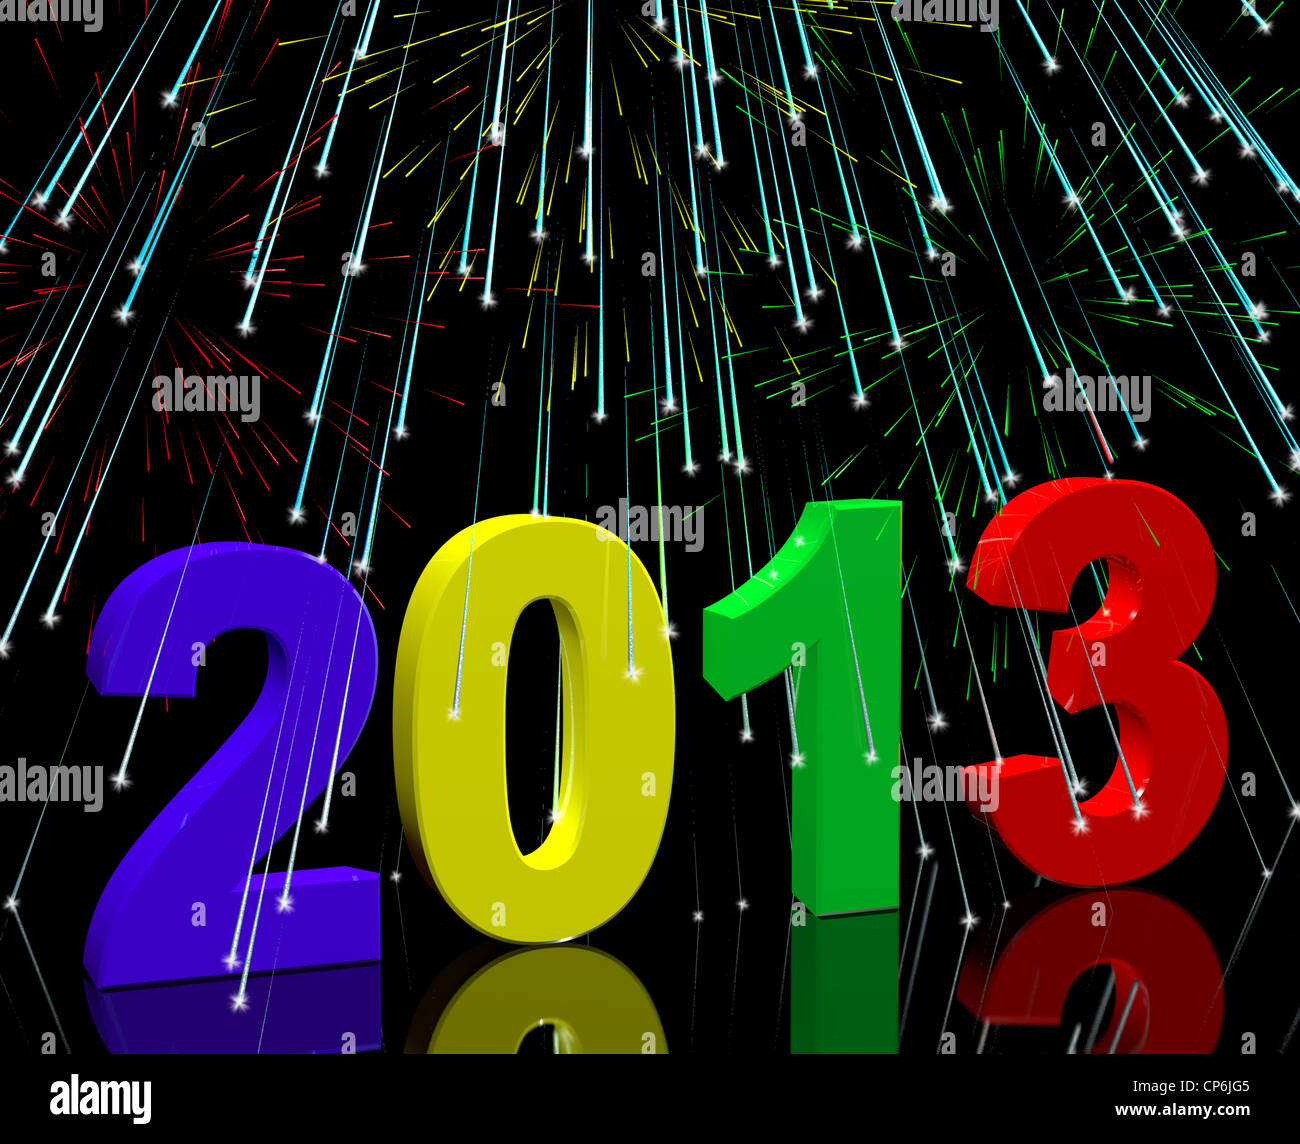 2013 With Fireworks Represents Year Two Thousand And Thirteen Stock Photo